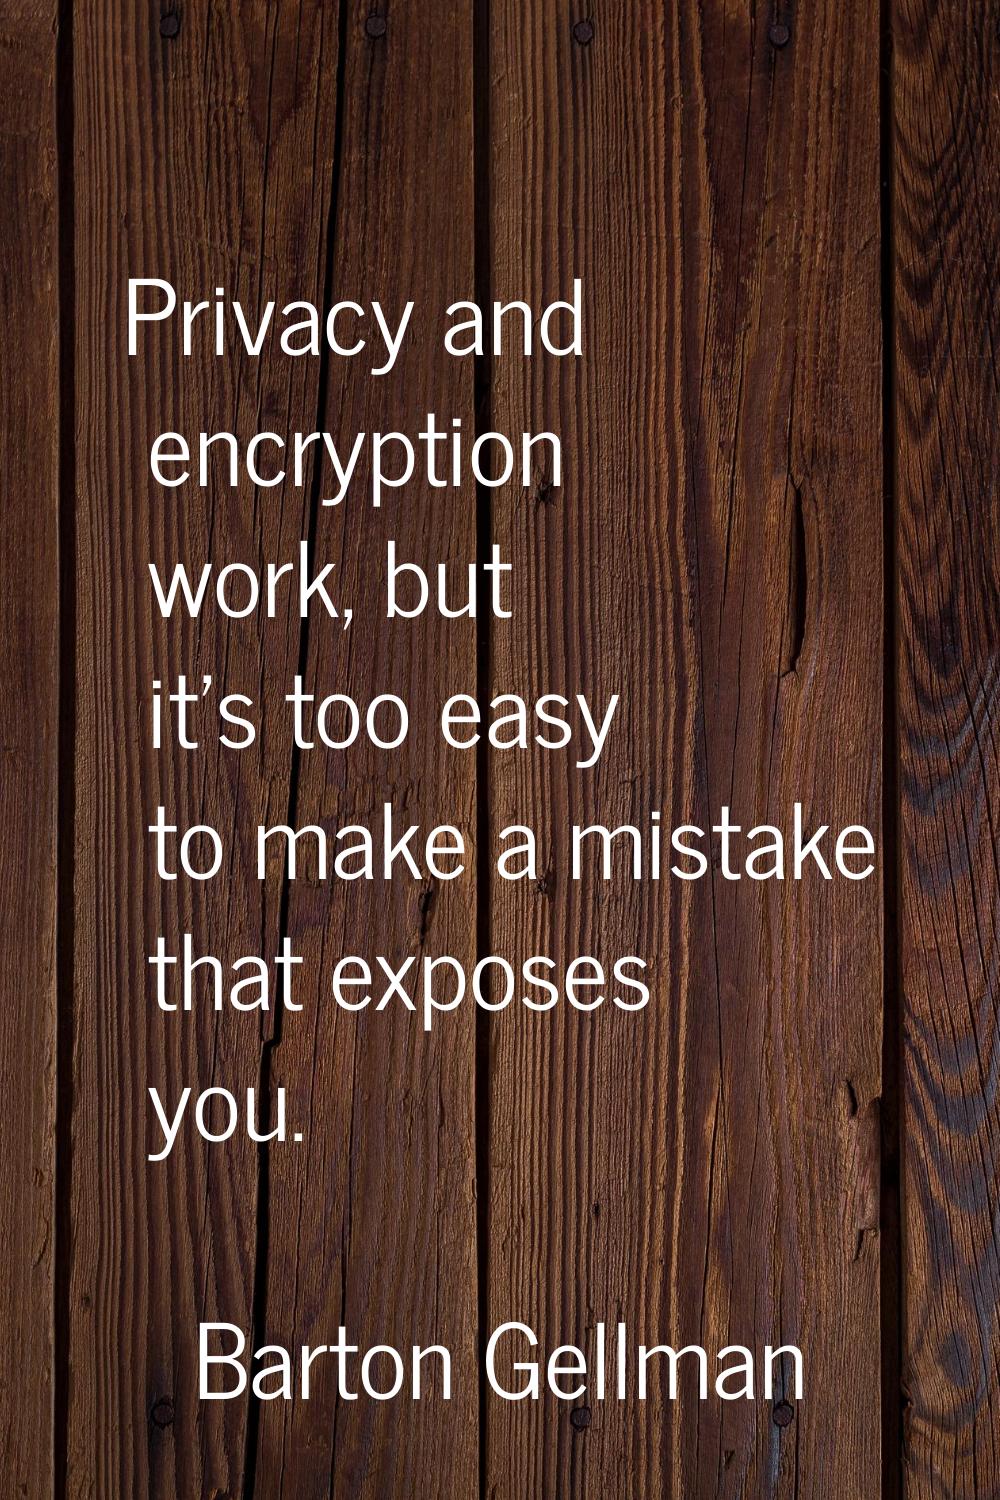 Privacy and encryption work, but it's too easy to make a mistake that exposes you.